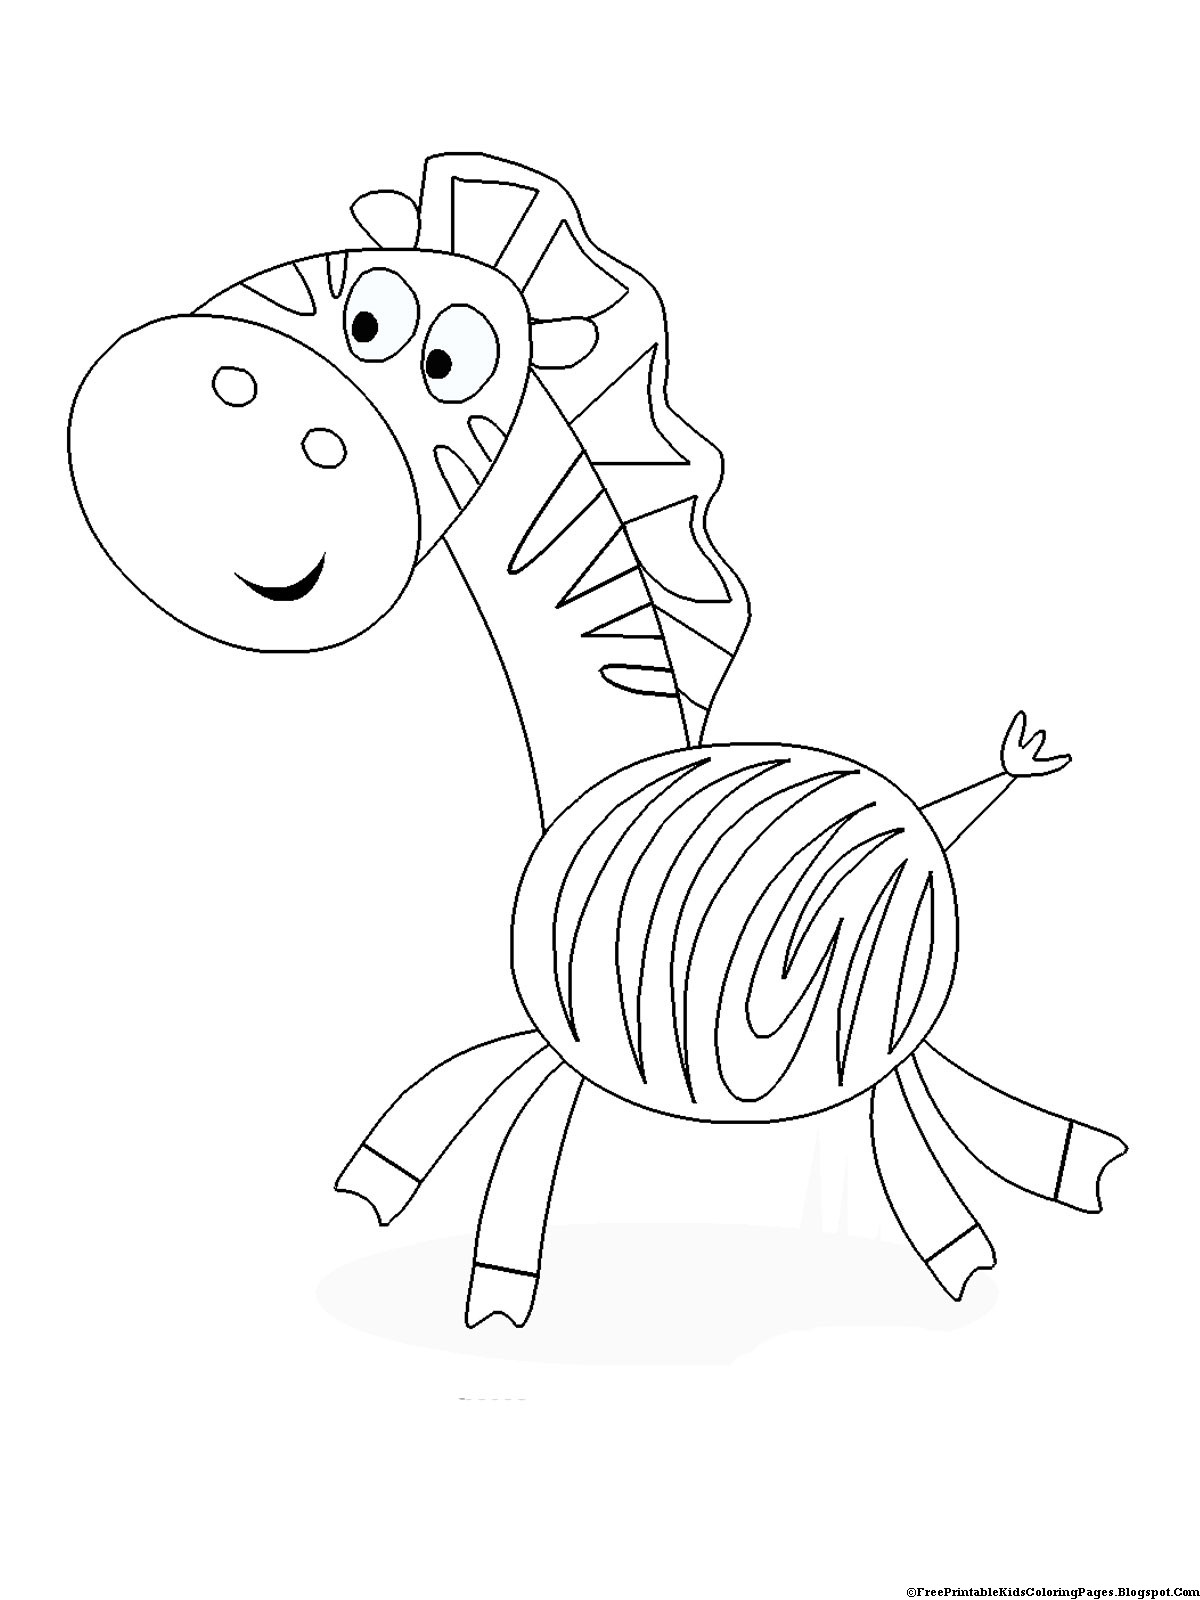 Printable Coloring Pages For Kids
 Zebra Coloring Pages